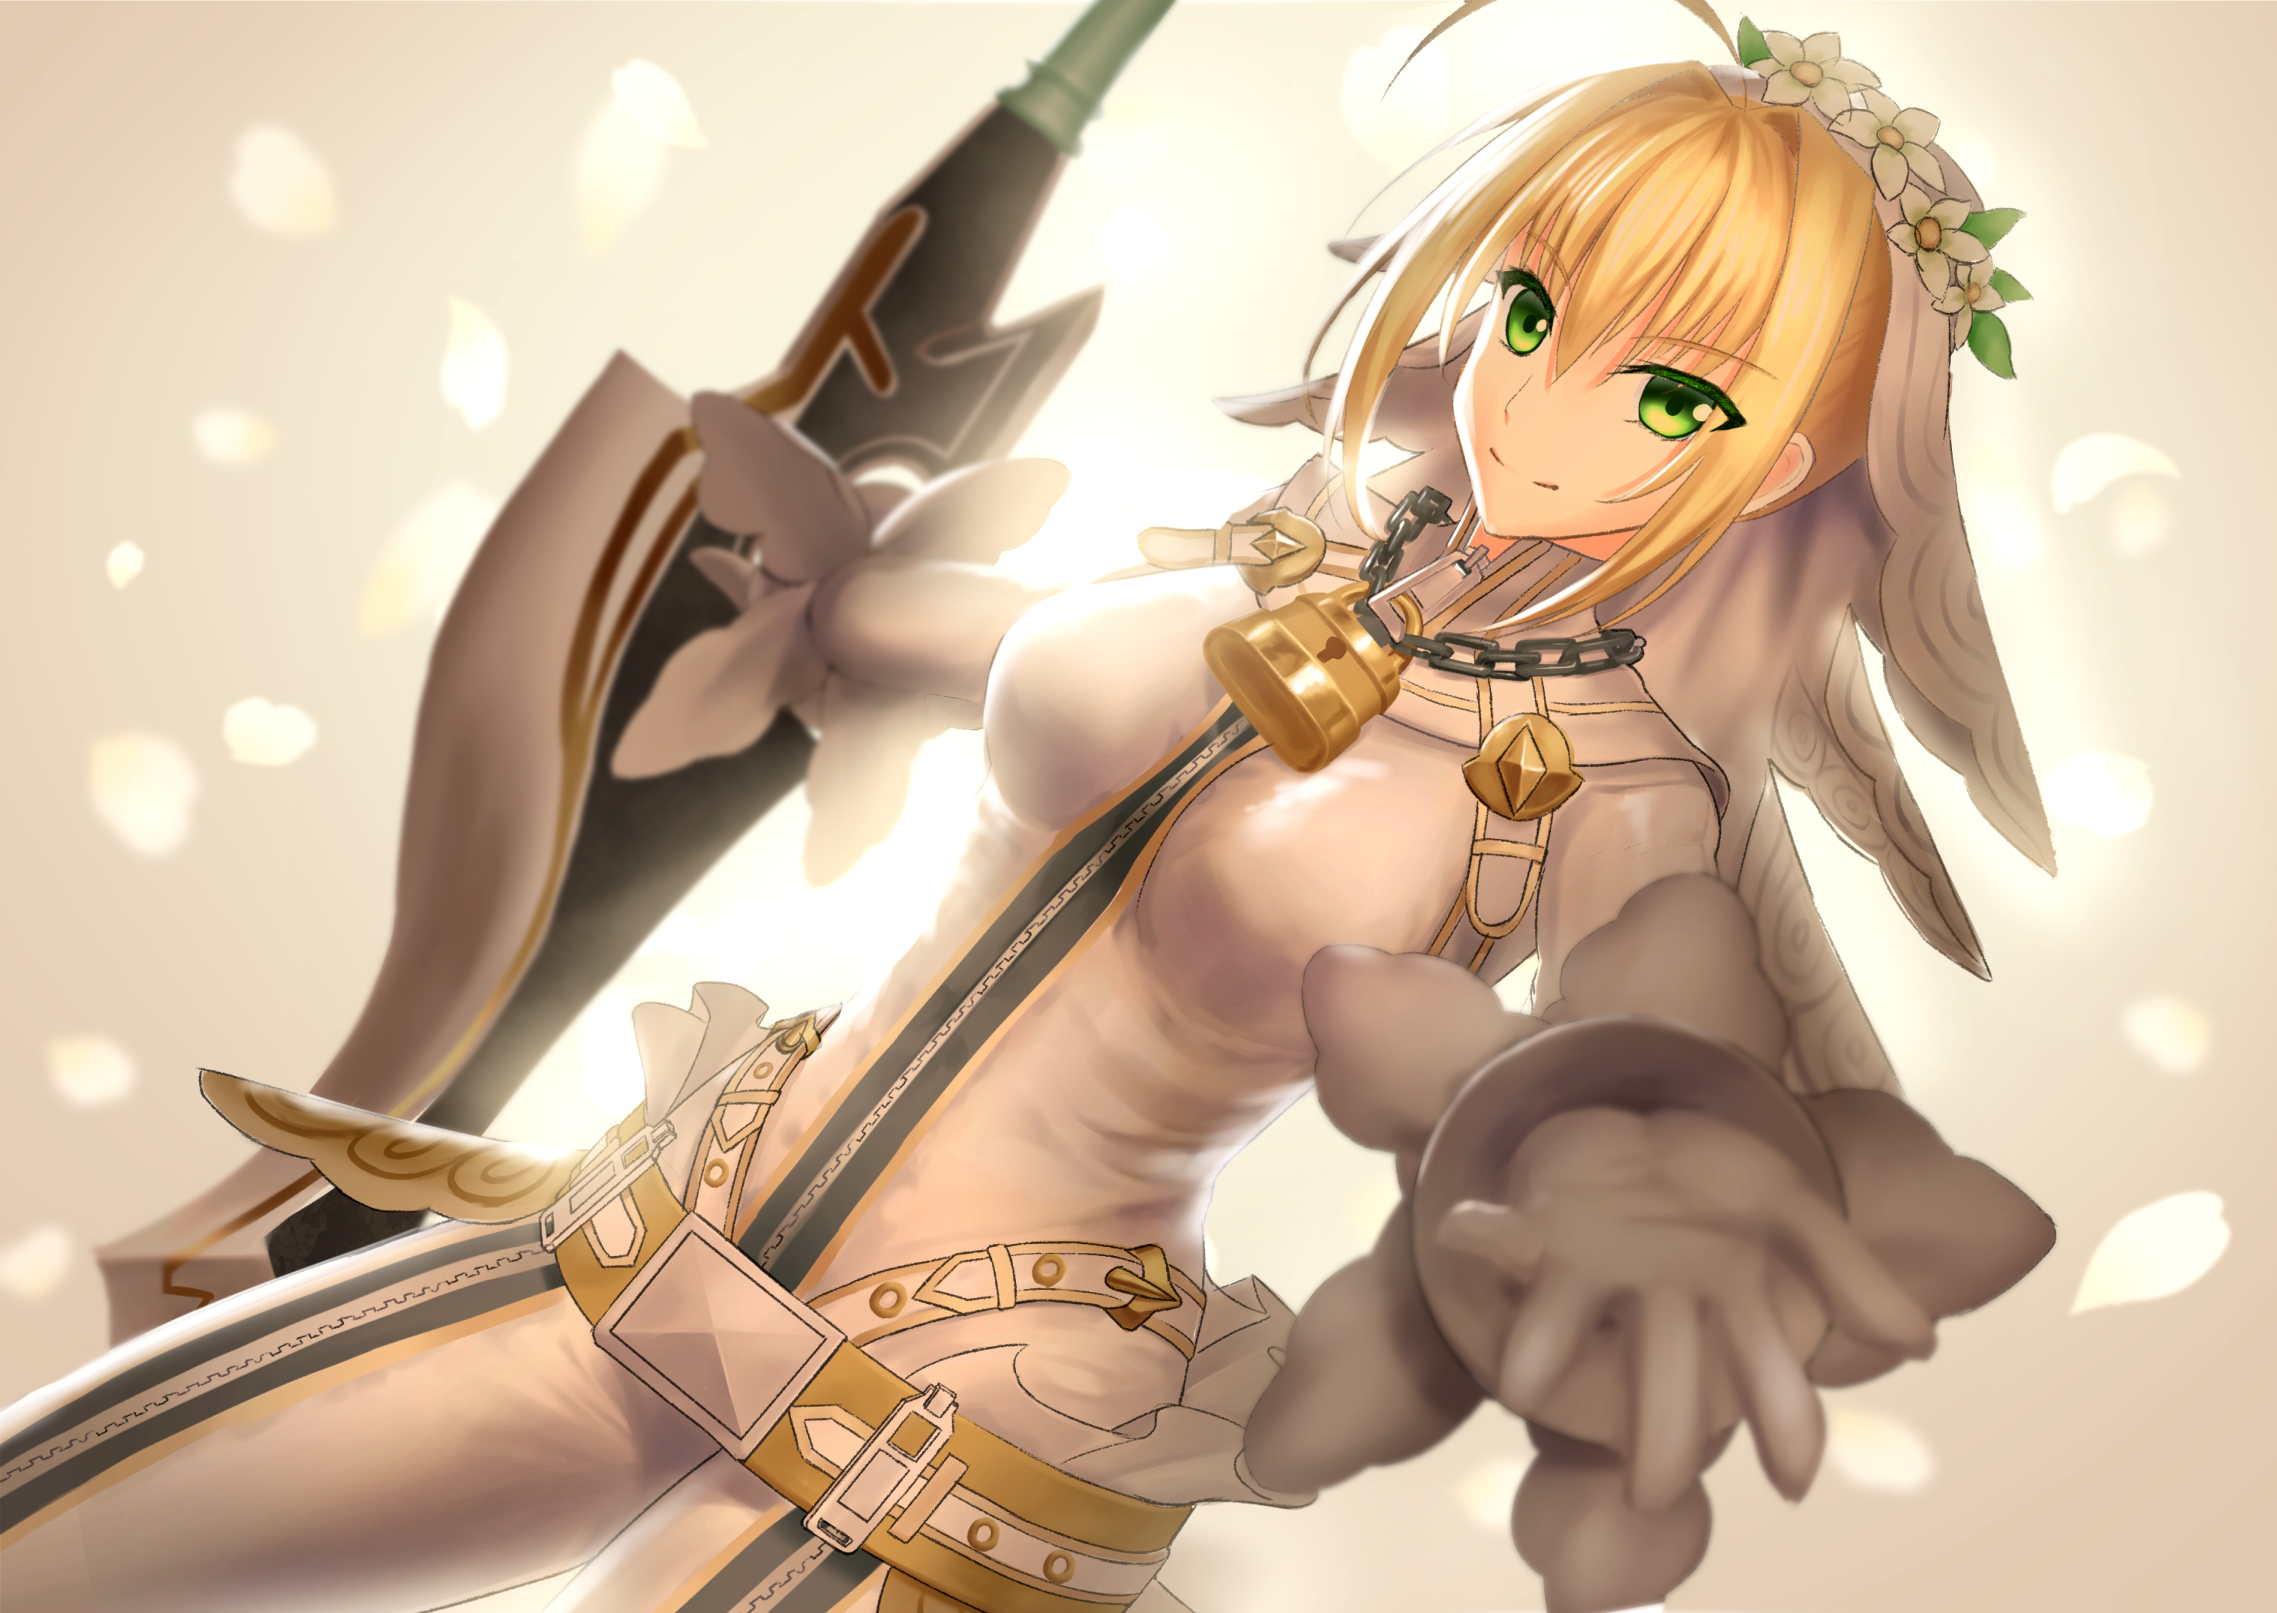 Anime 2277x1613 anime anime girls Fate series Fate/Extra Fate/Extra CCC Fate/Grand Order Nero Claudius Saber Bride long hair blonde solo artwork digital art fan art green eyes petals